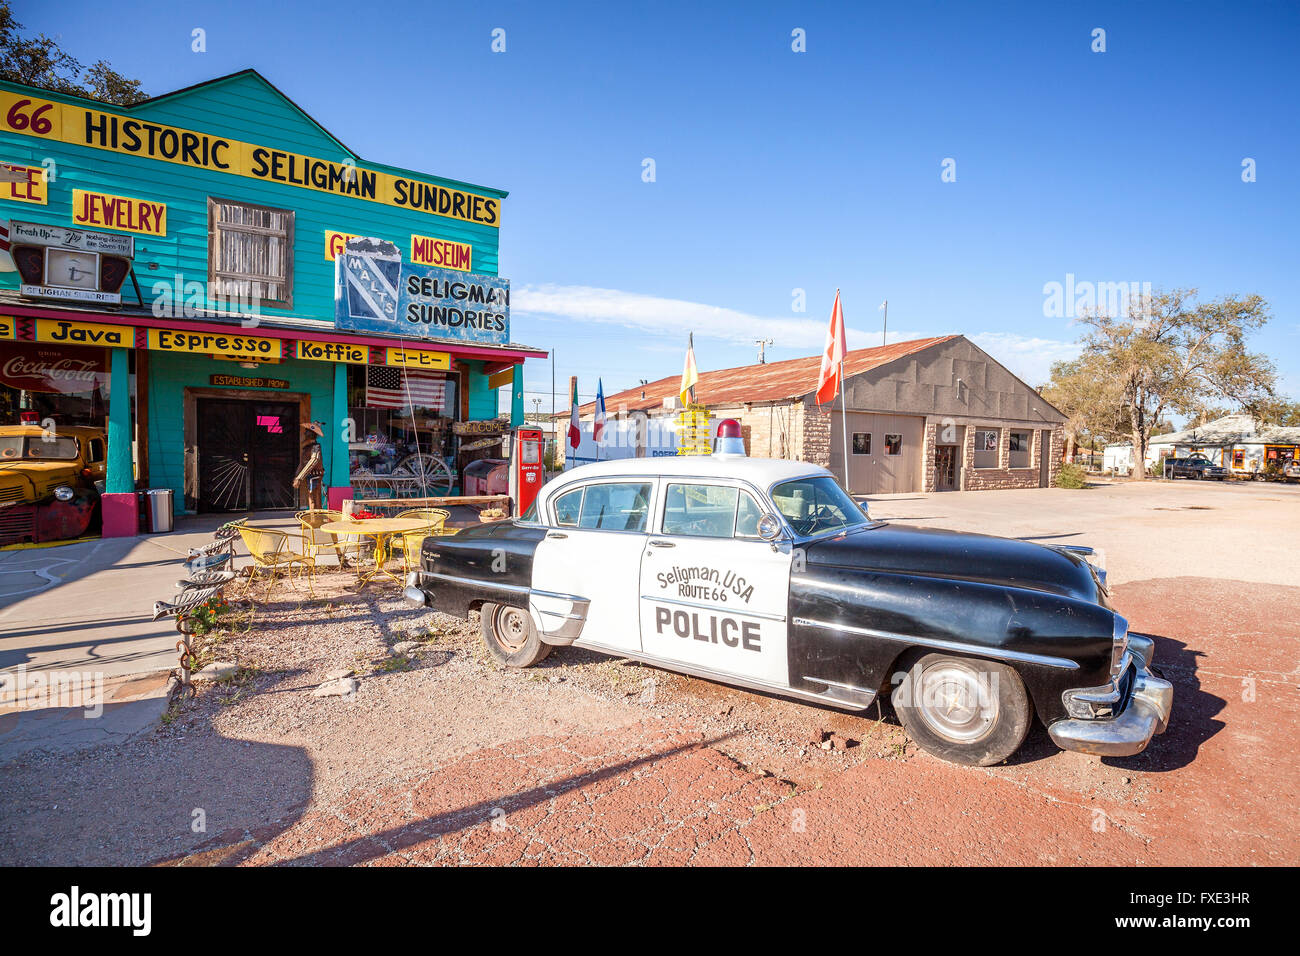 Old police car in front of historic Sundries Building. Stock Photo